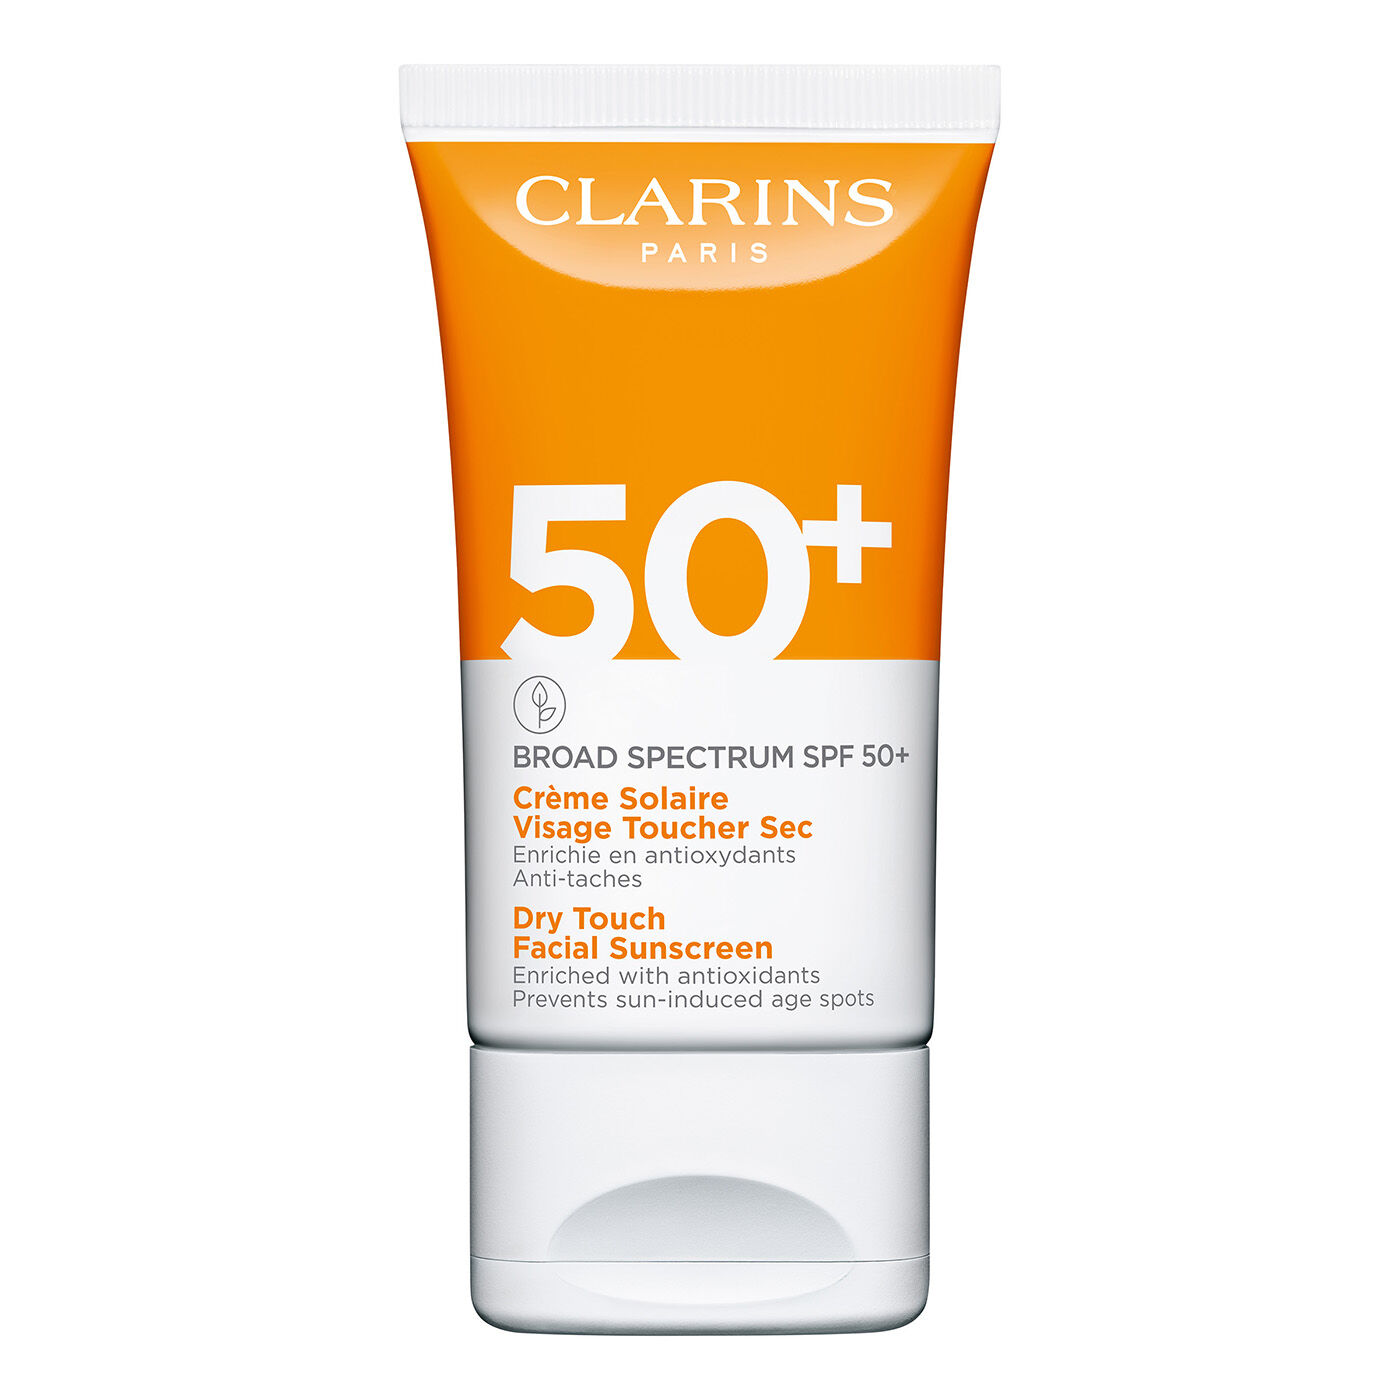 Clarins Dry Touch Facial Sunscreen - Broad Spectrum Spf 50+ 1.7 Oz. In White